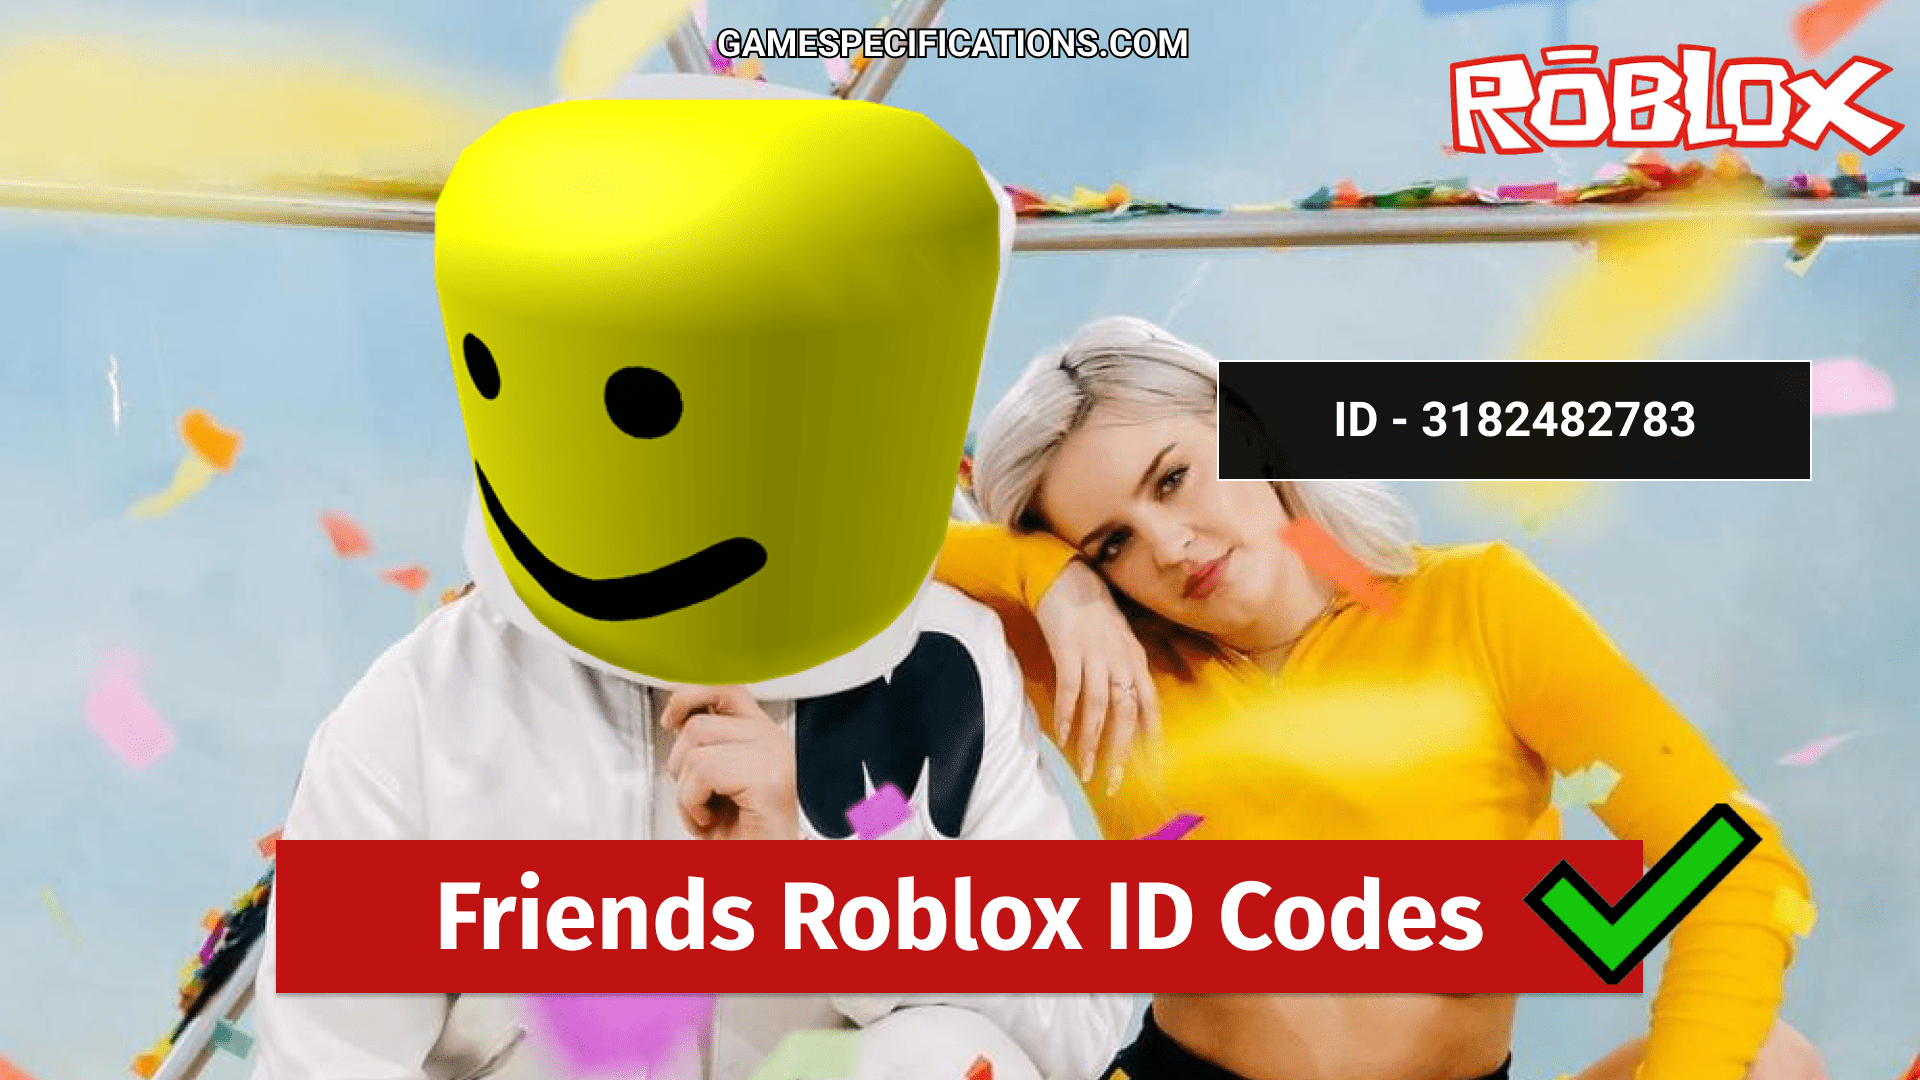 Friends Roblox Id Codes From Marshmello 2021 Game Specifications - let me go roblox song id